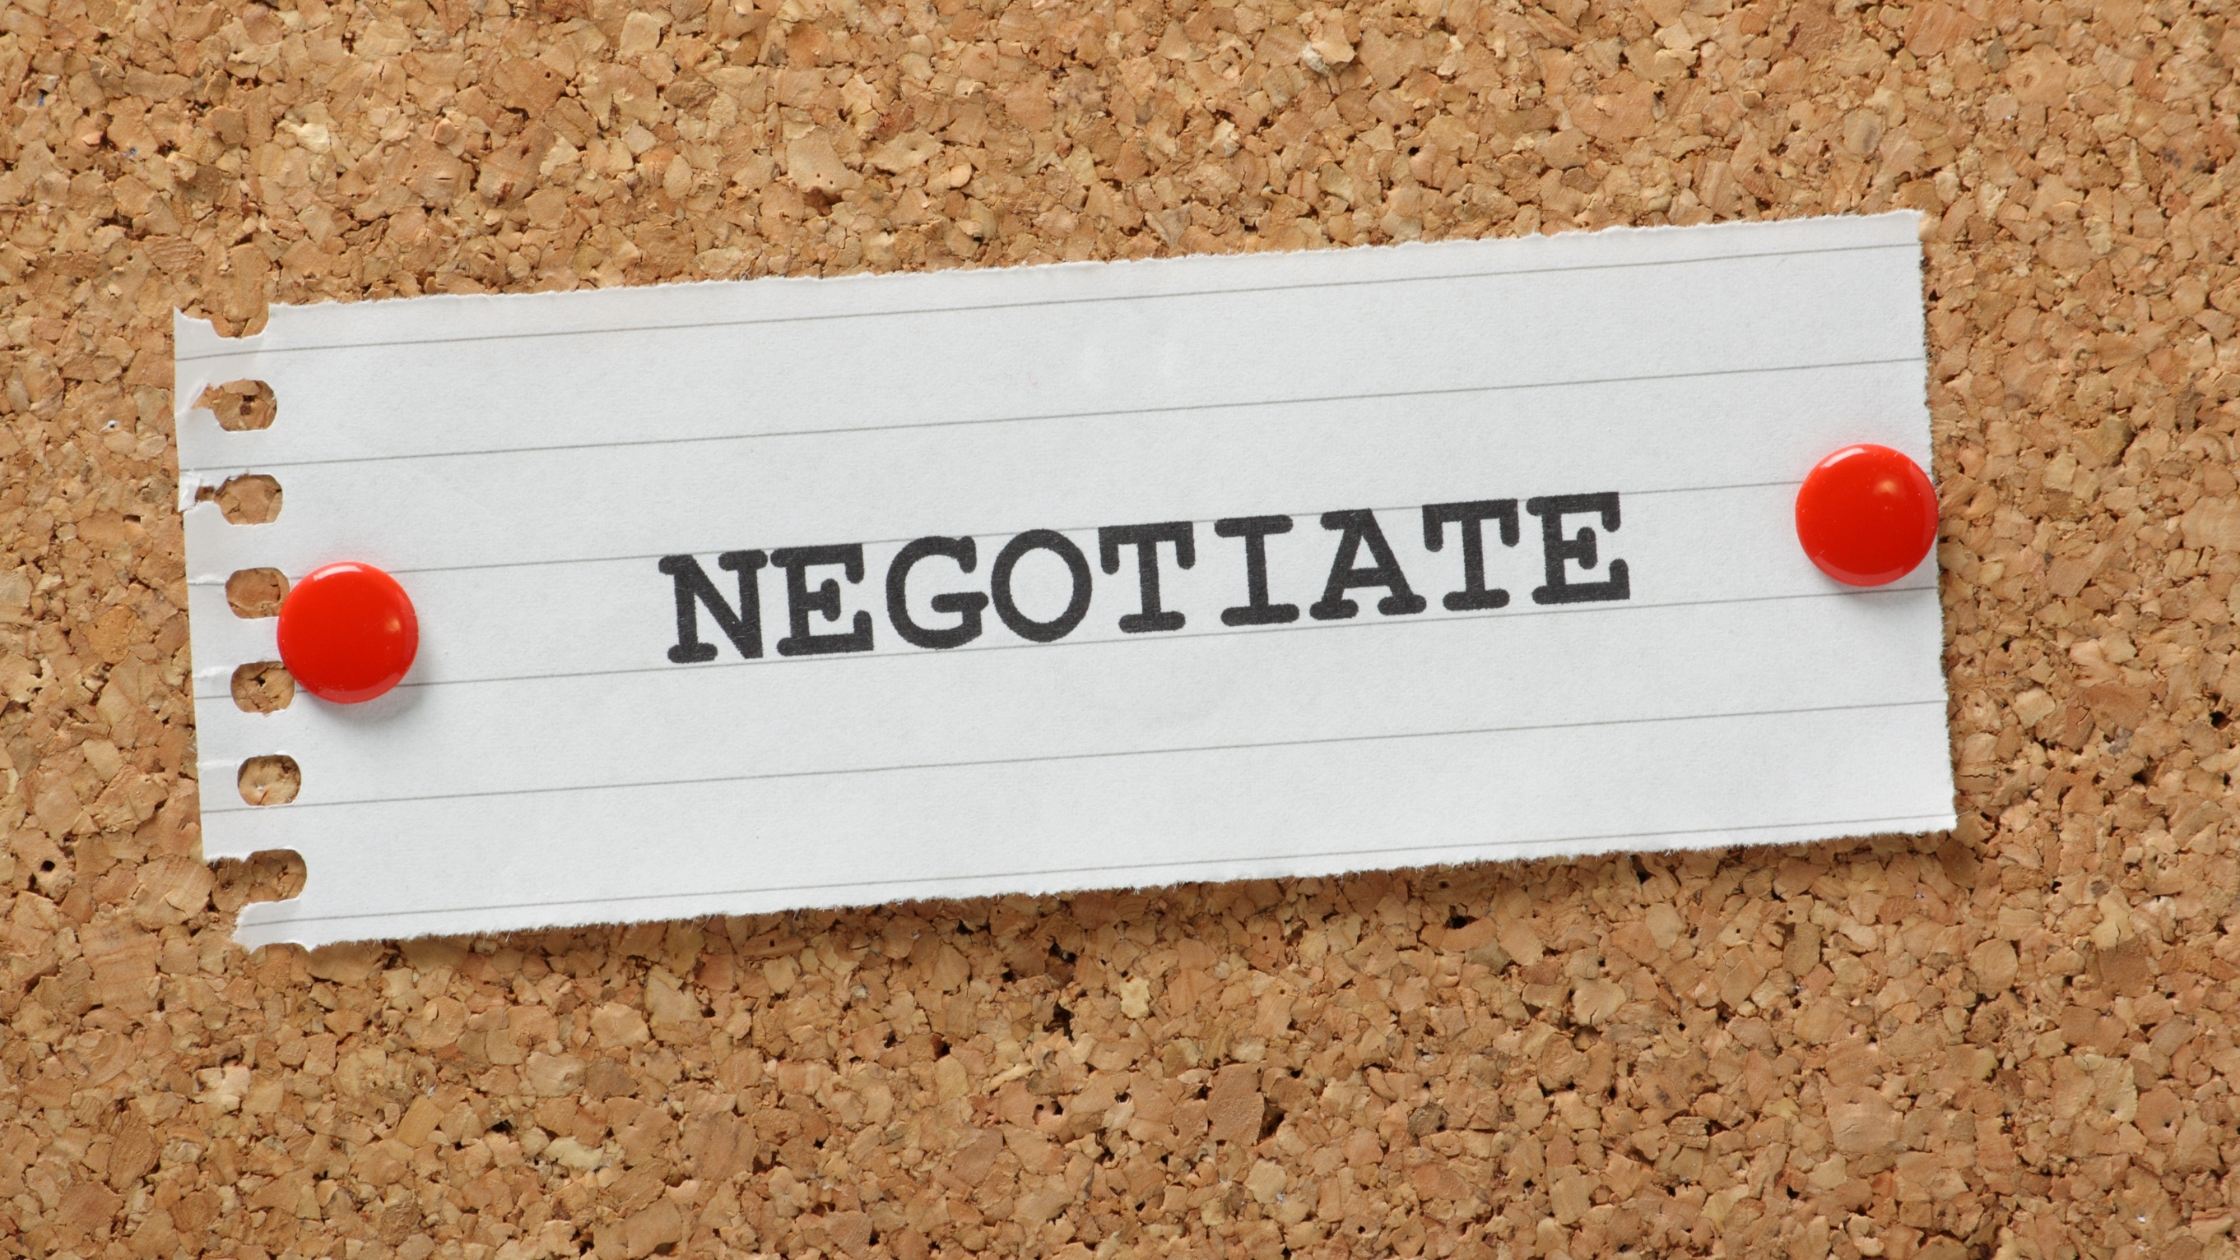 Negotiate Debt Settlements: Image of a piece of paper pinned to a corkboard with the word "Negotiate" written on it in black ink. Debt settlement concept.